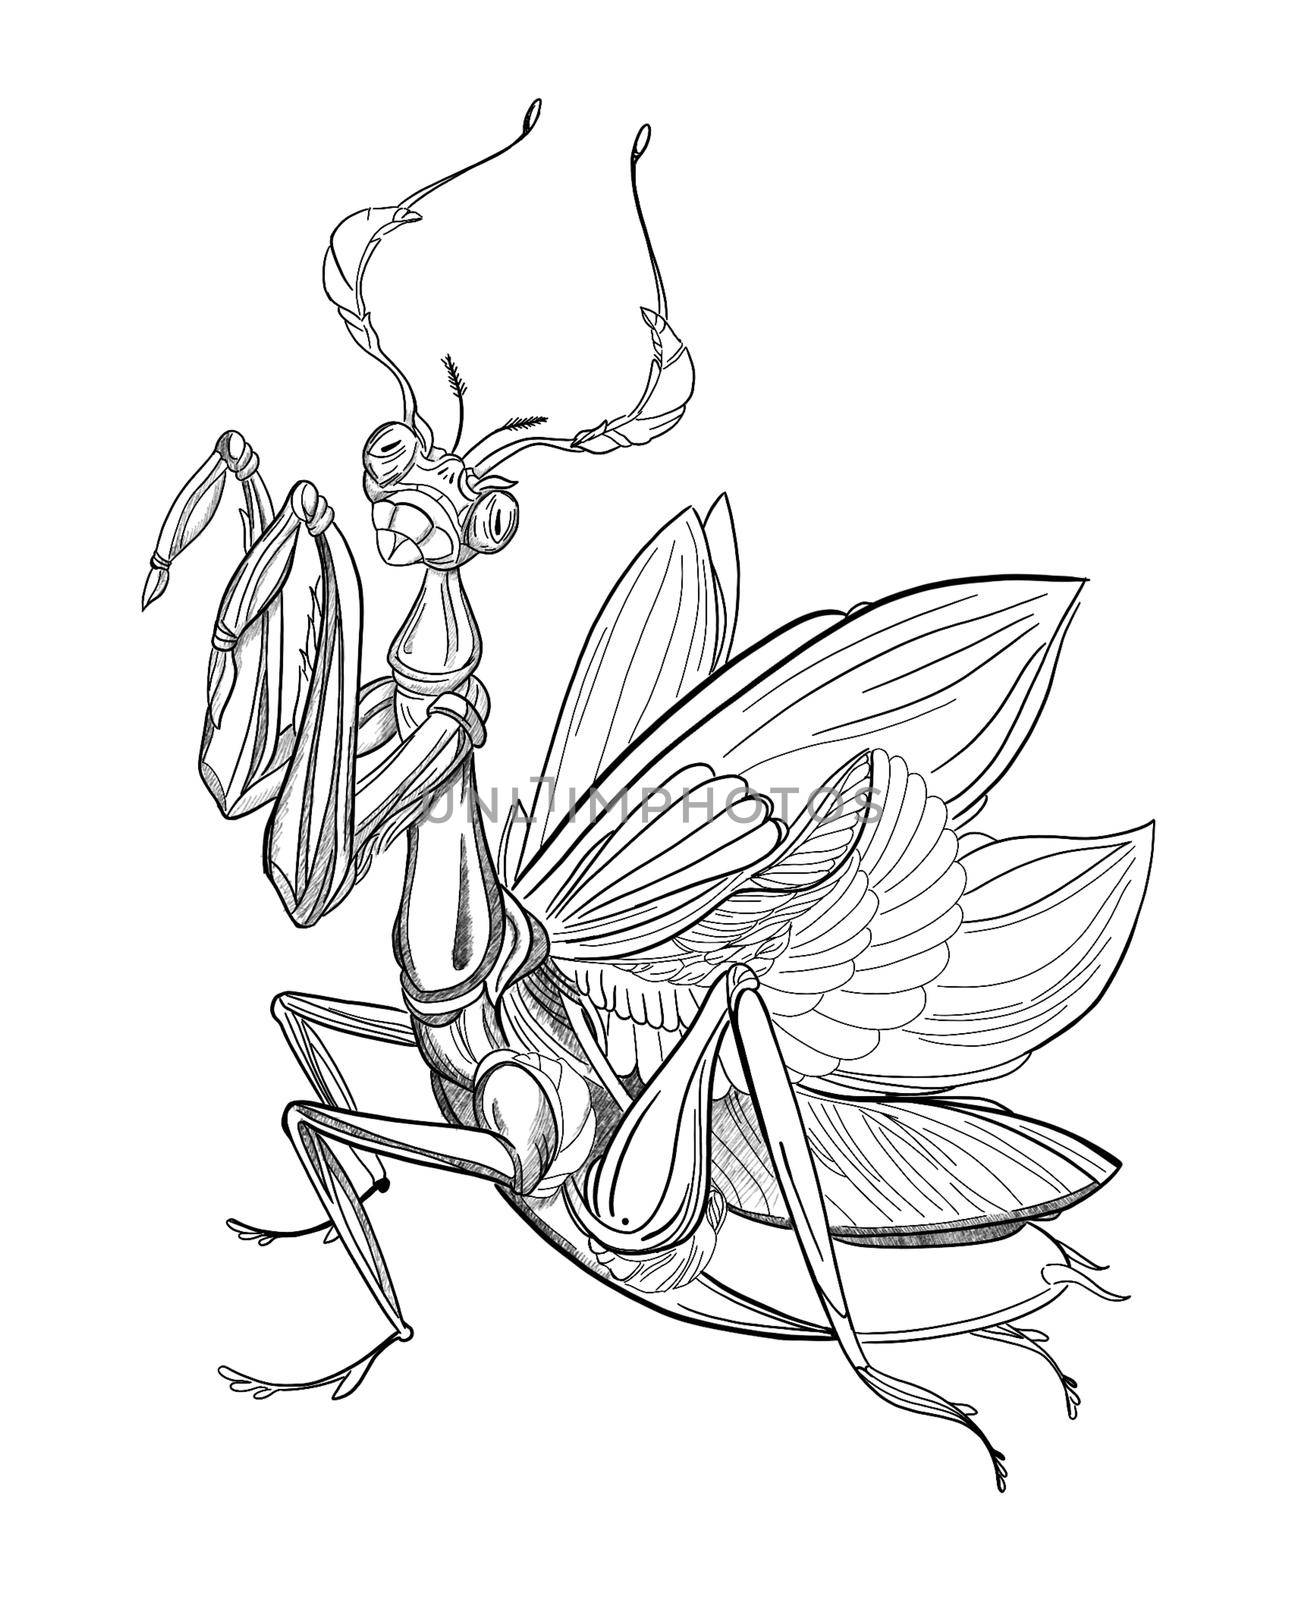 pencil drawing of a praying mantis with paws up illustration